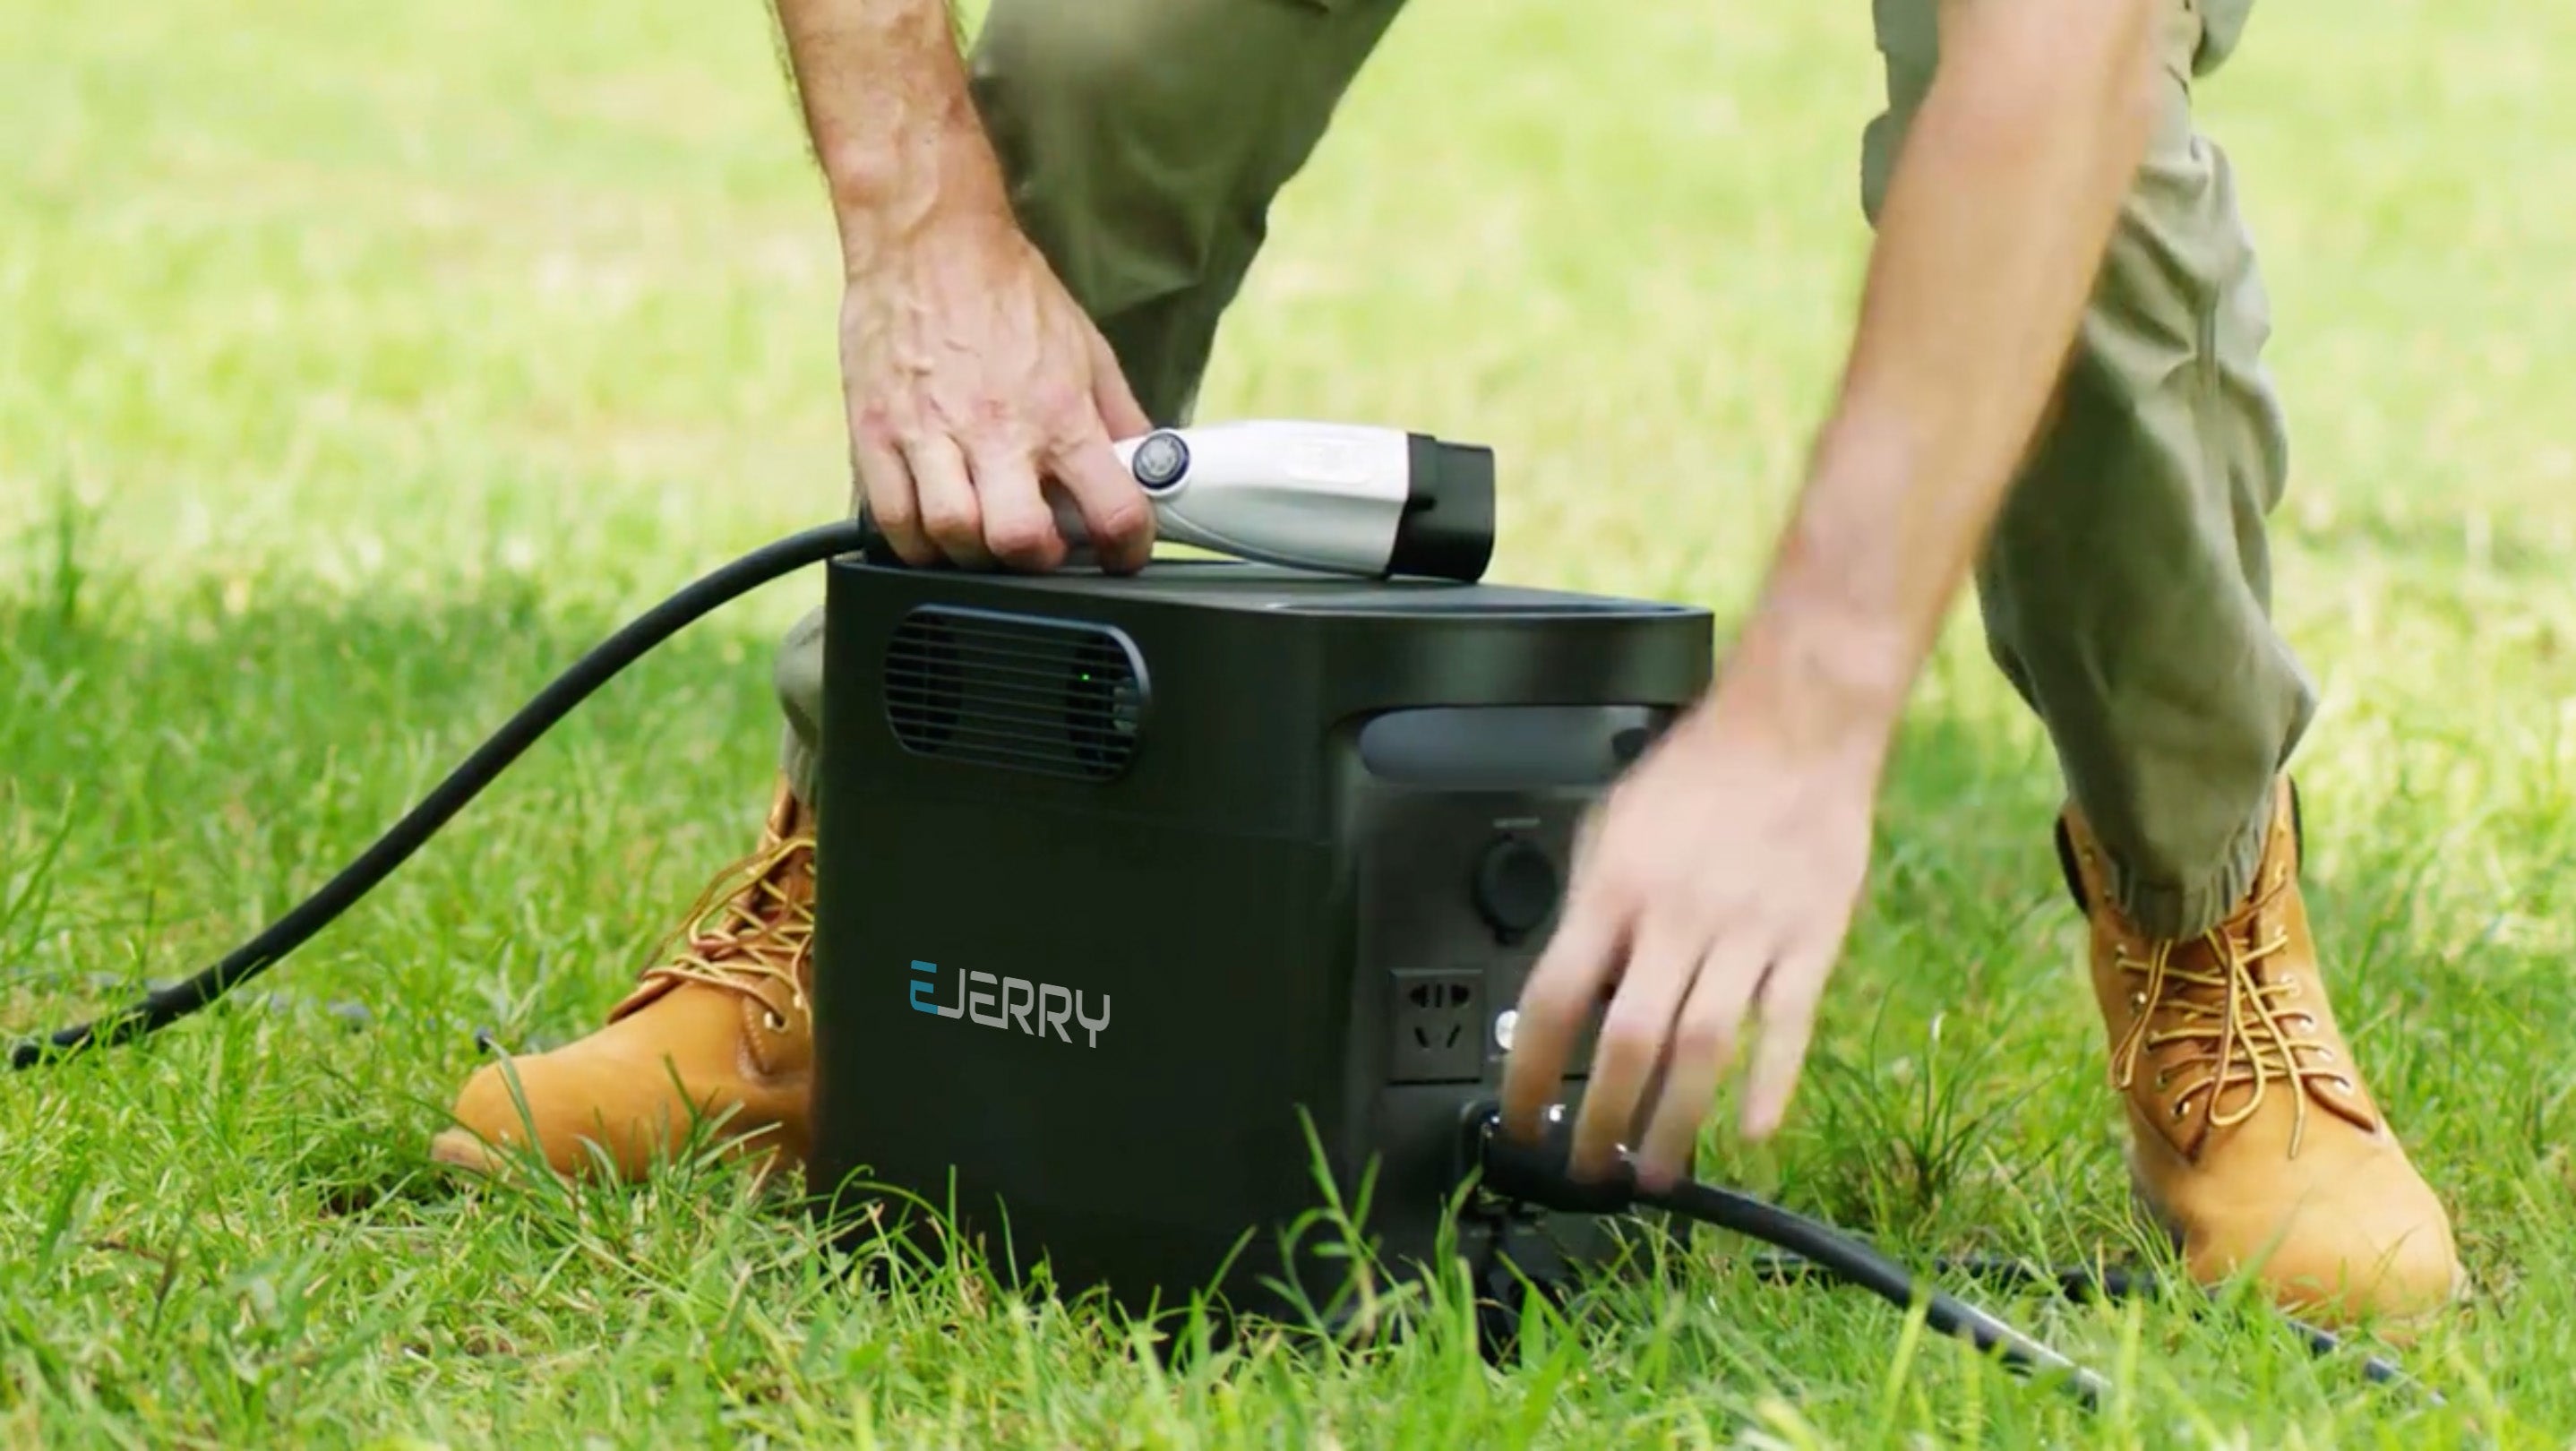 EJERRY - Portable EV Charger with EV Charging Gun